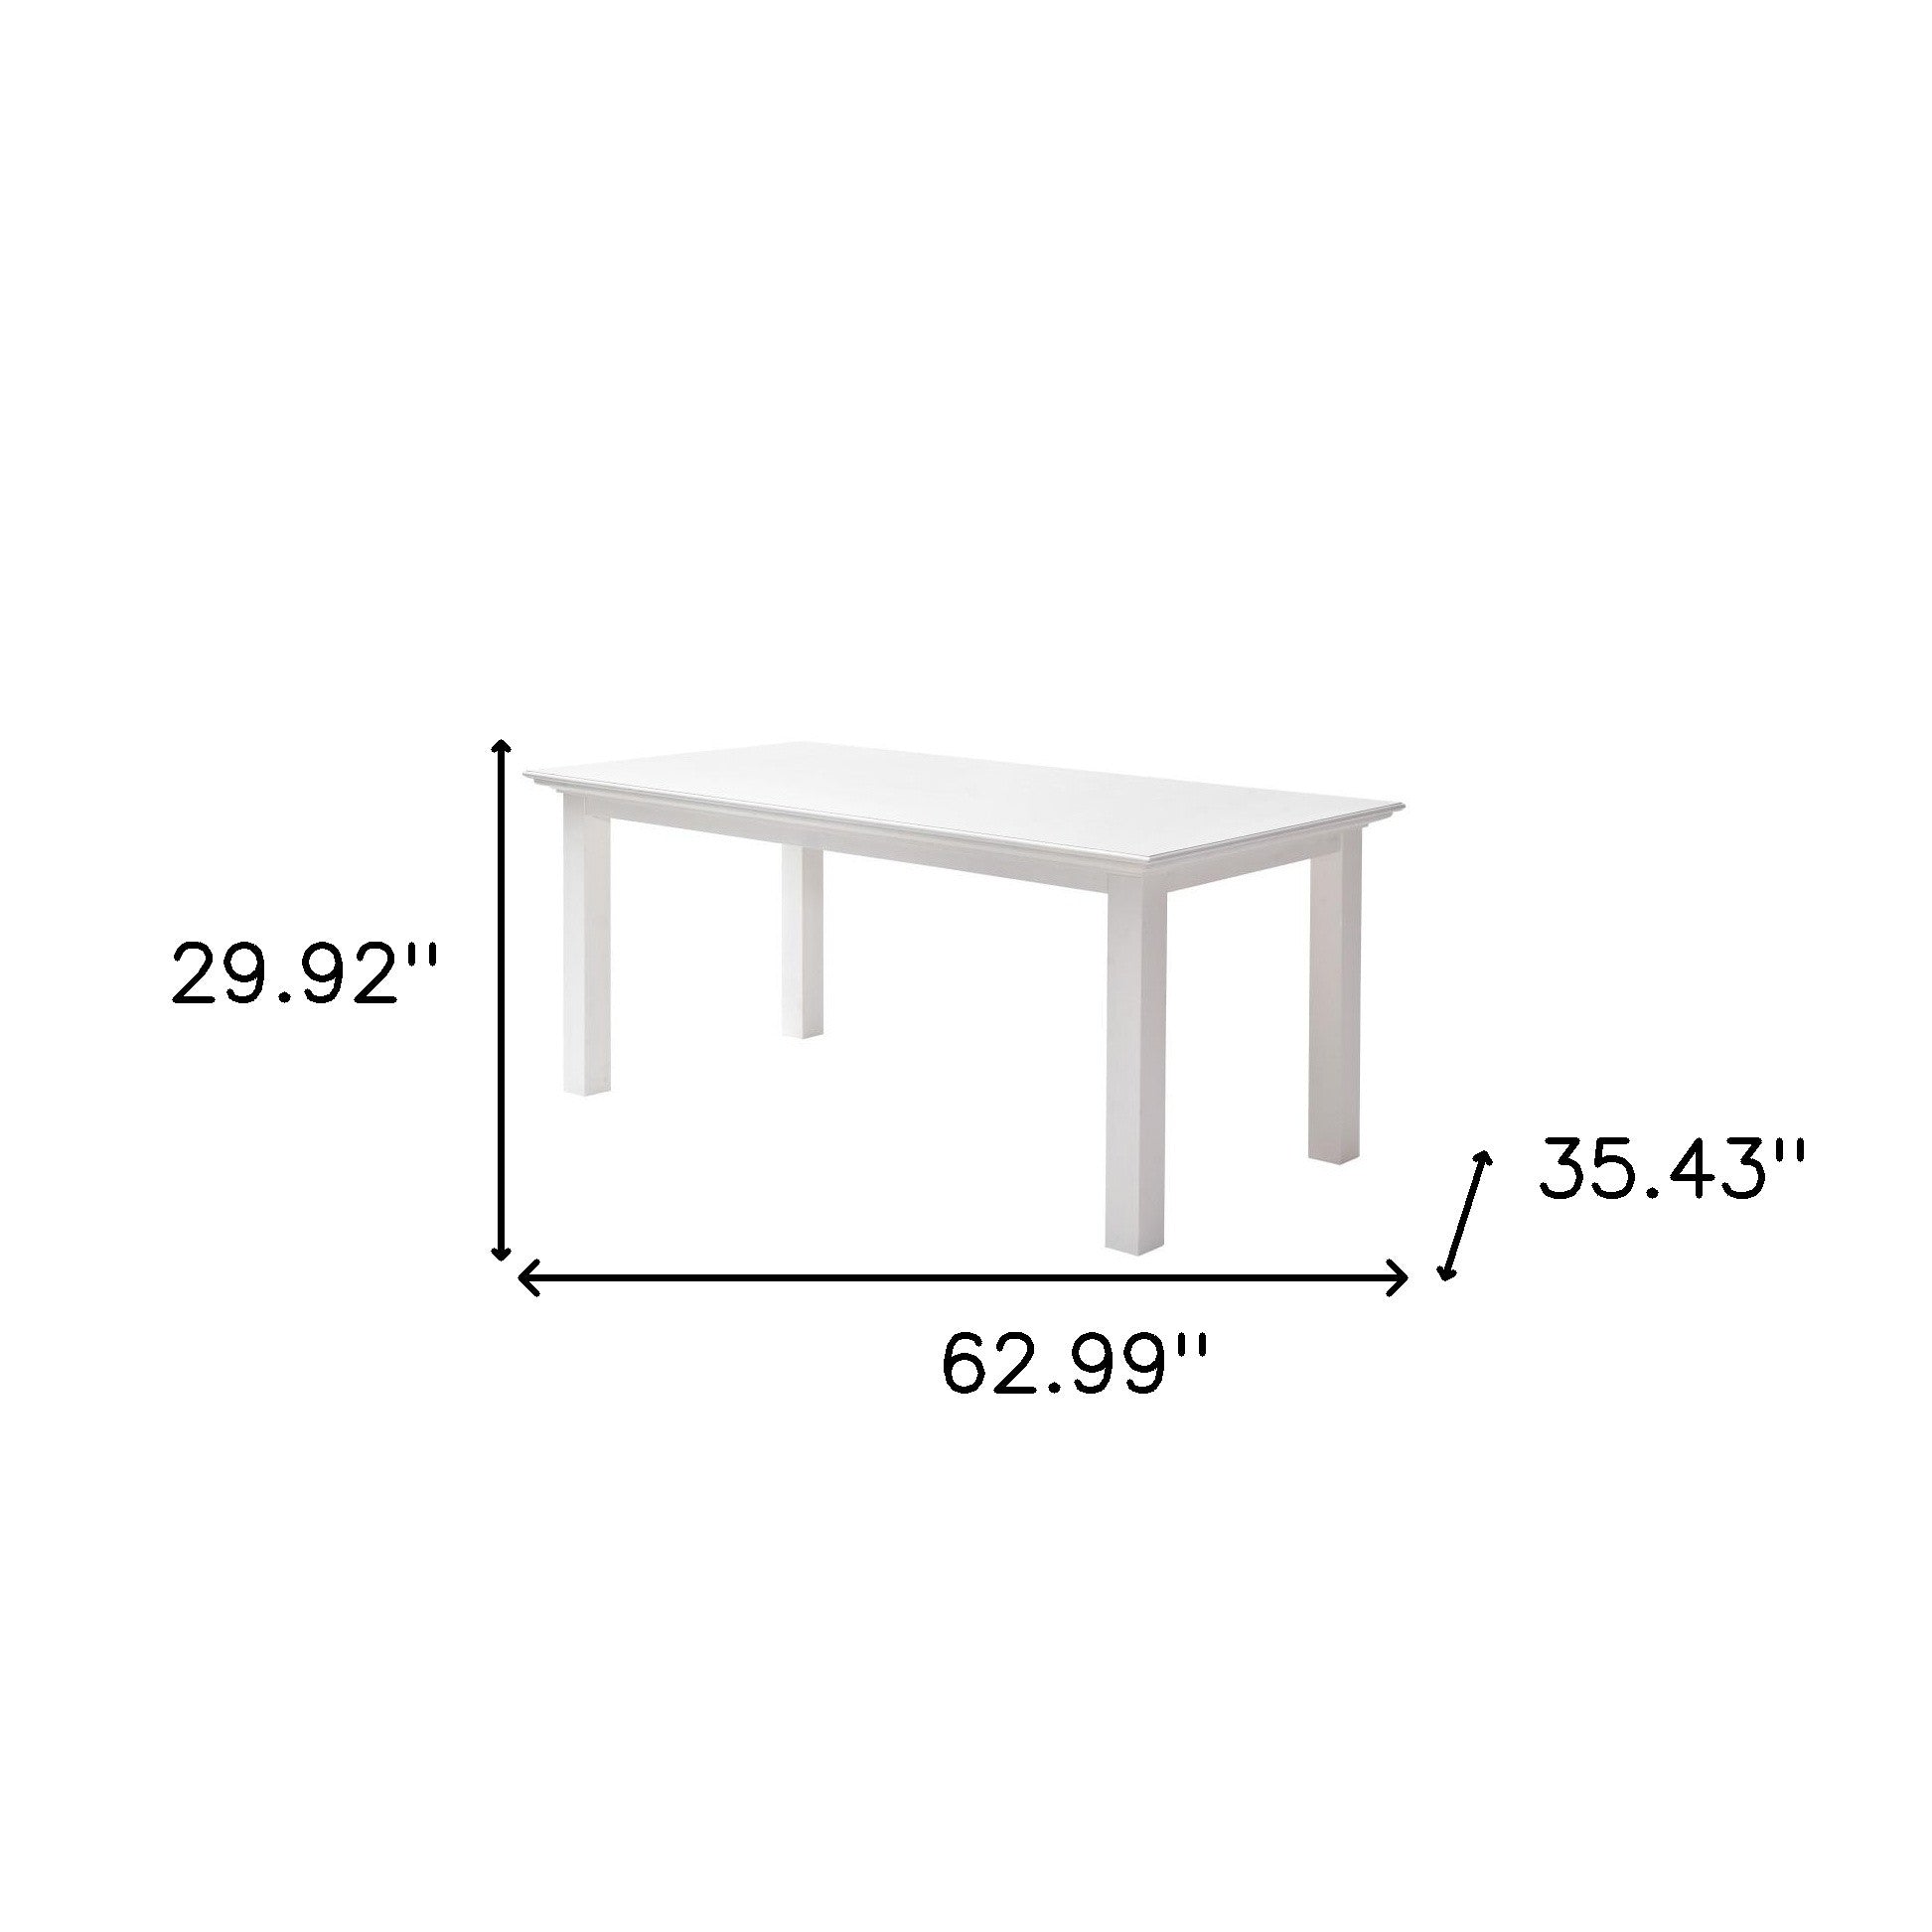 63" White Solid Wood Dining Table